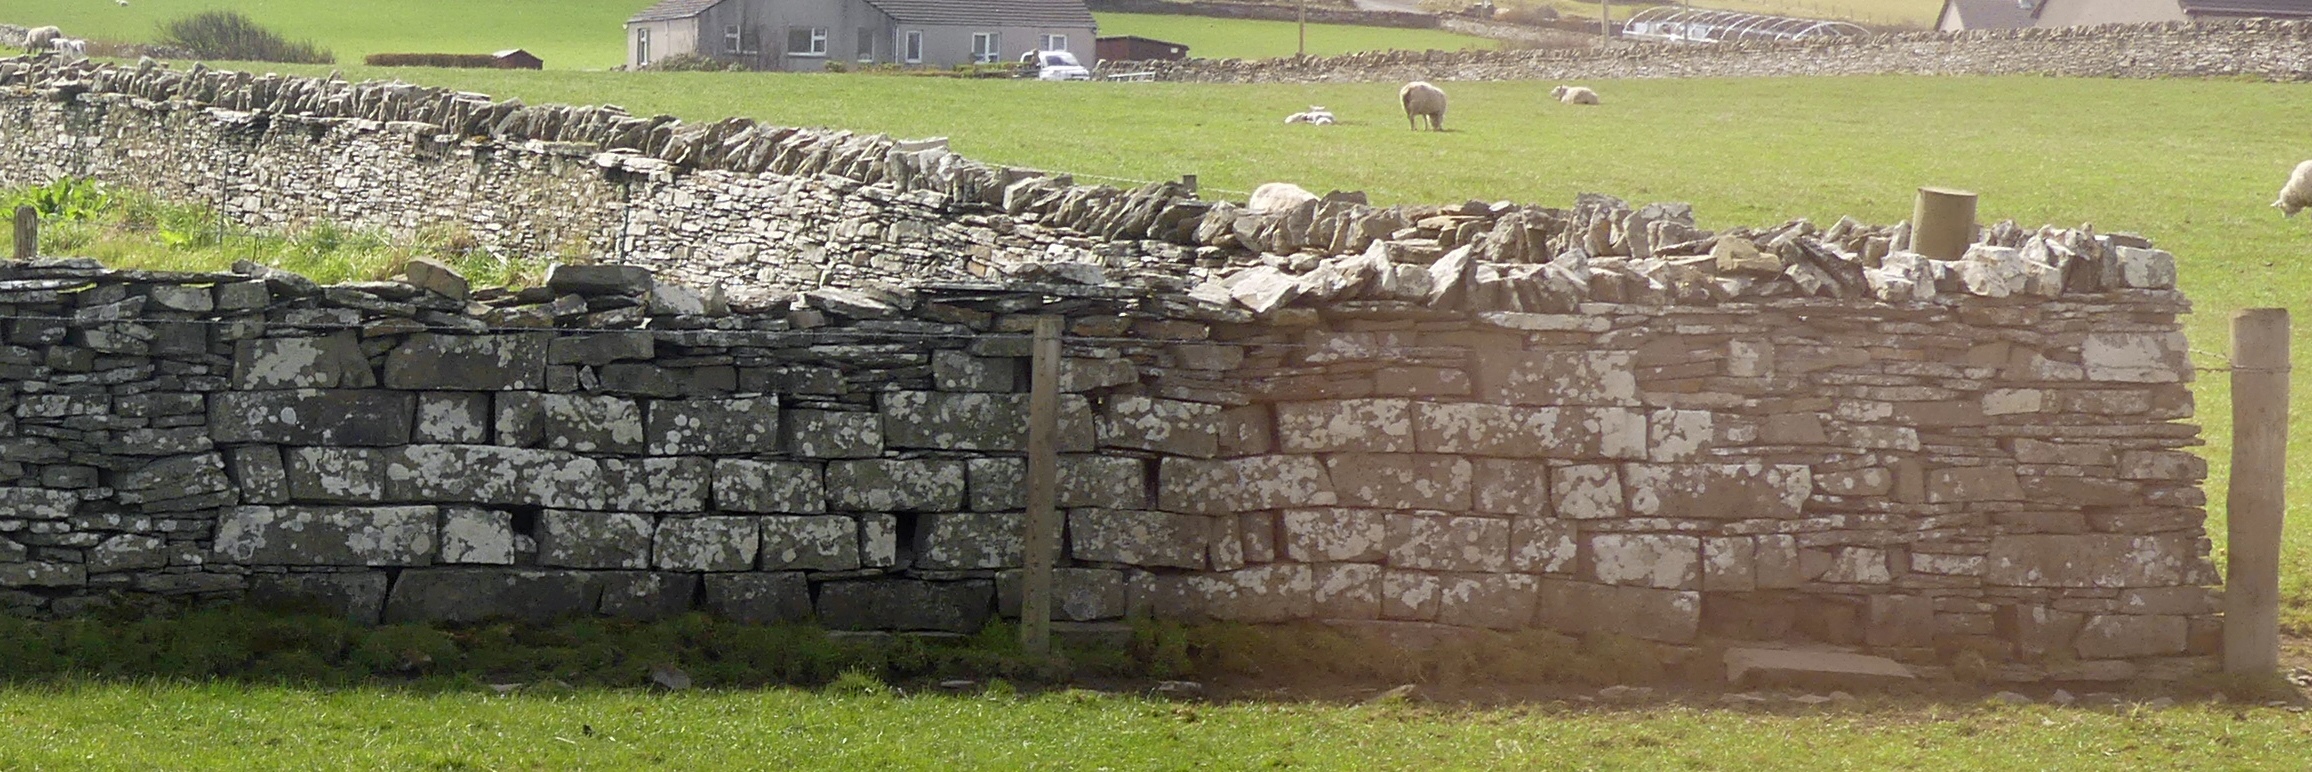 Stones used to repair a field wall